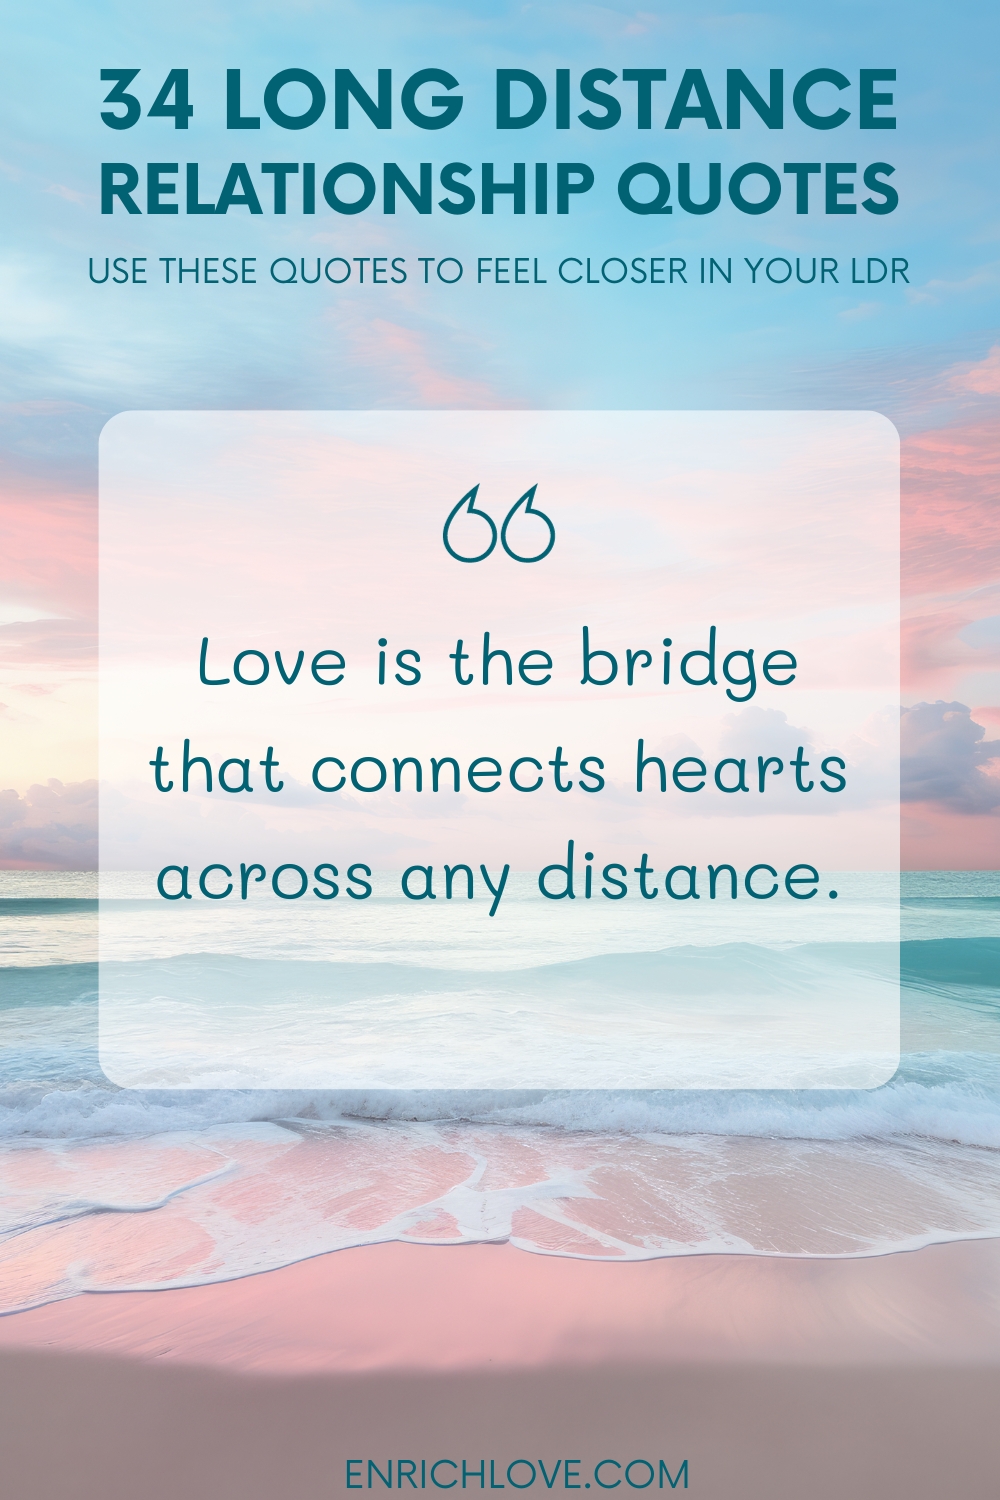 34 Long Distance Relationship Quotes - Love is the bridge that connects hearts across any distance.